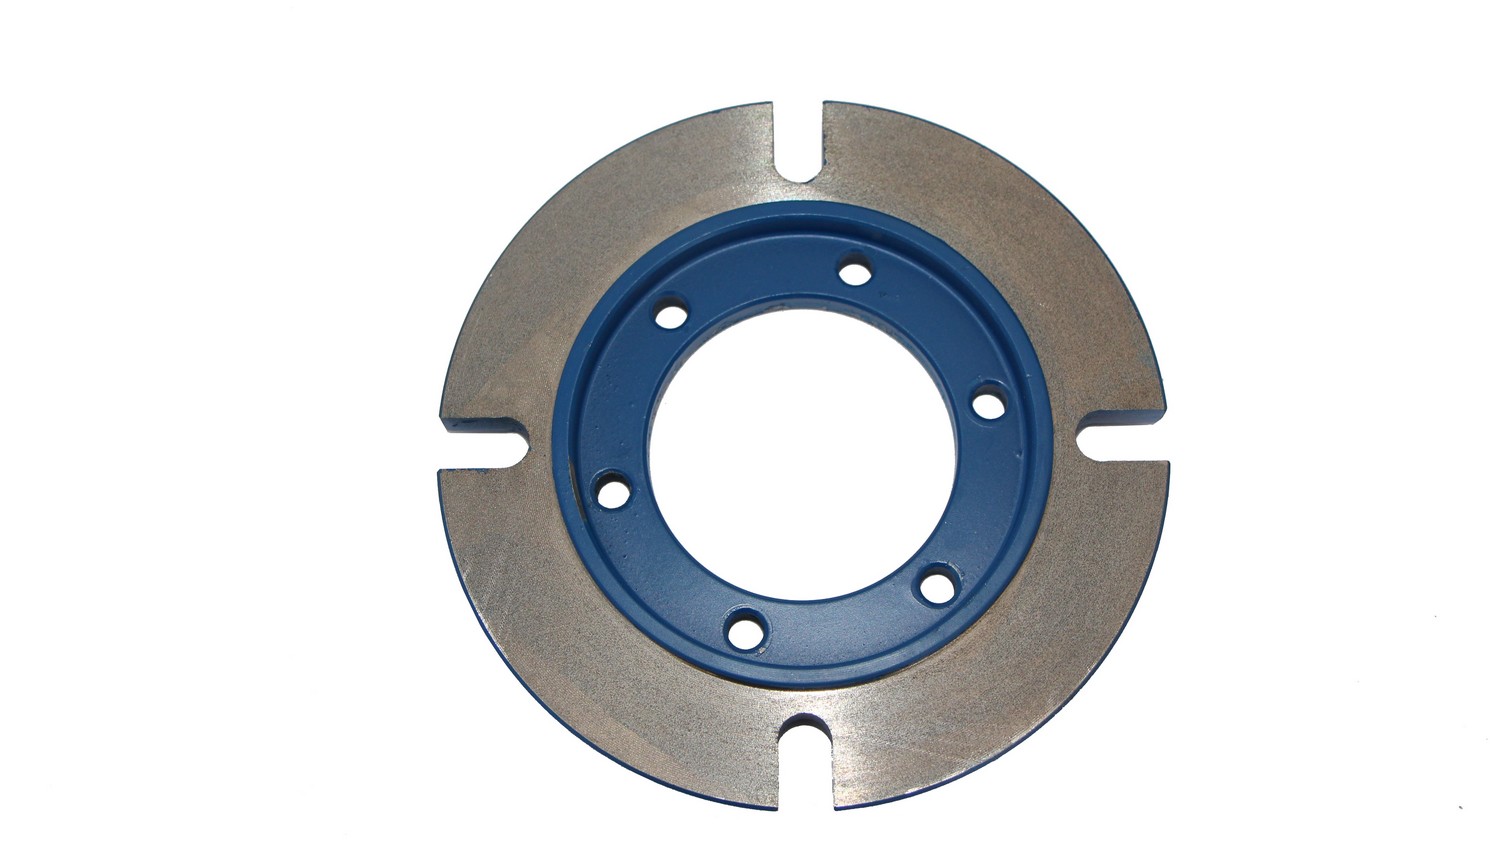 Output flange for MN-F172/173 Opt. 2